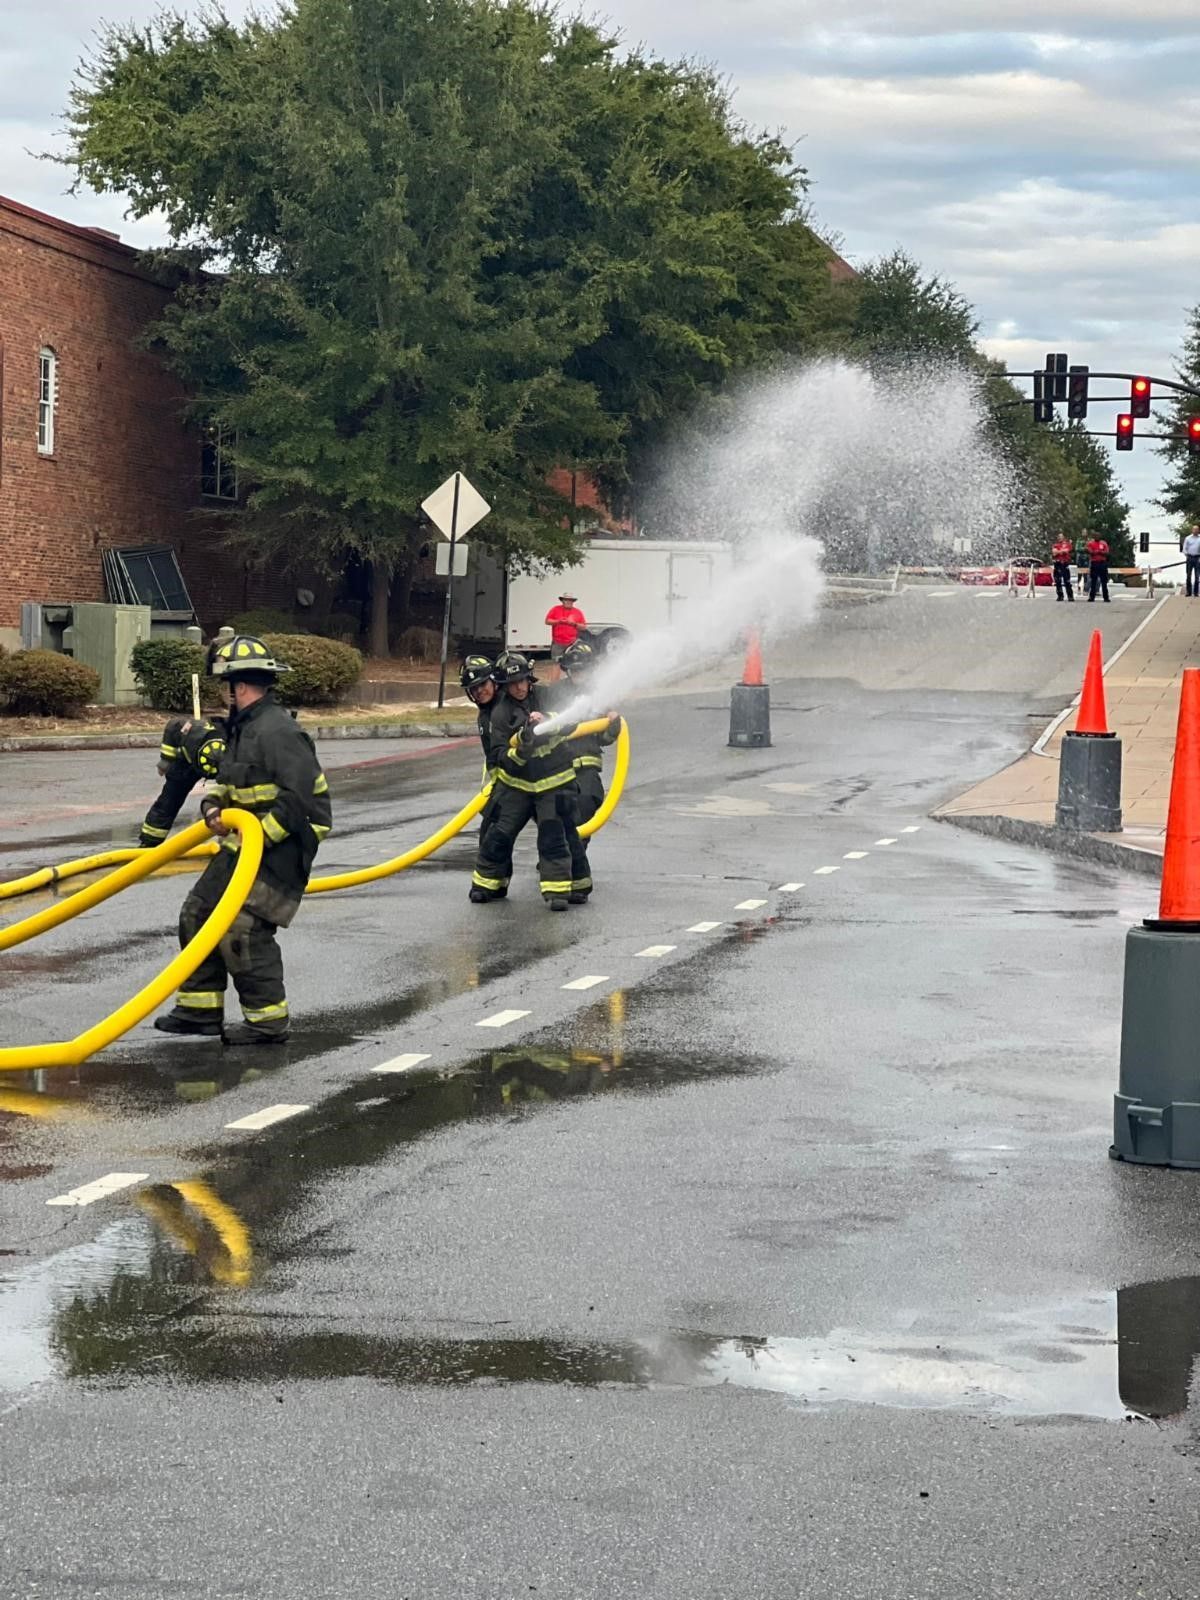 The Georgia Association of Fire Chiefs (GAFC) and the Georgia State Firefighters Association (GSFA) invite you to join us for the 2023 Georgia Fire Service Conference set for August 22-25, 2023 in Augusta, GA.